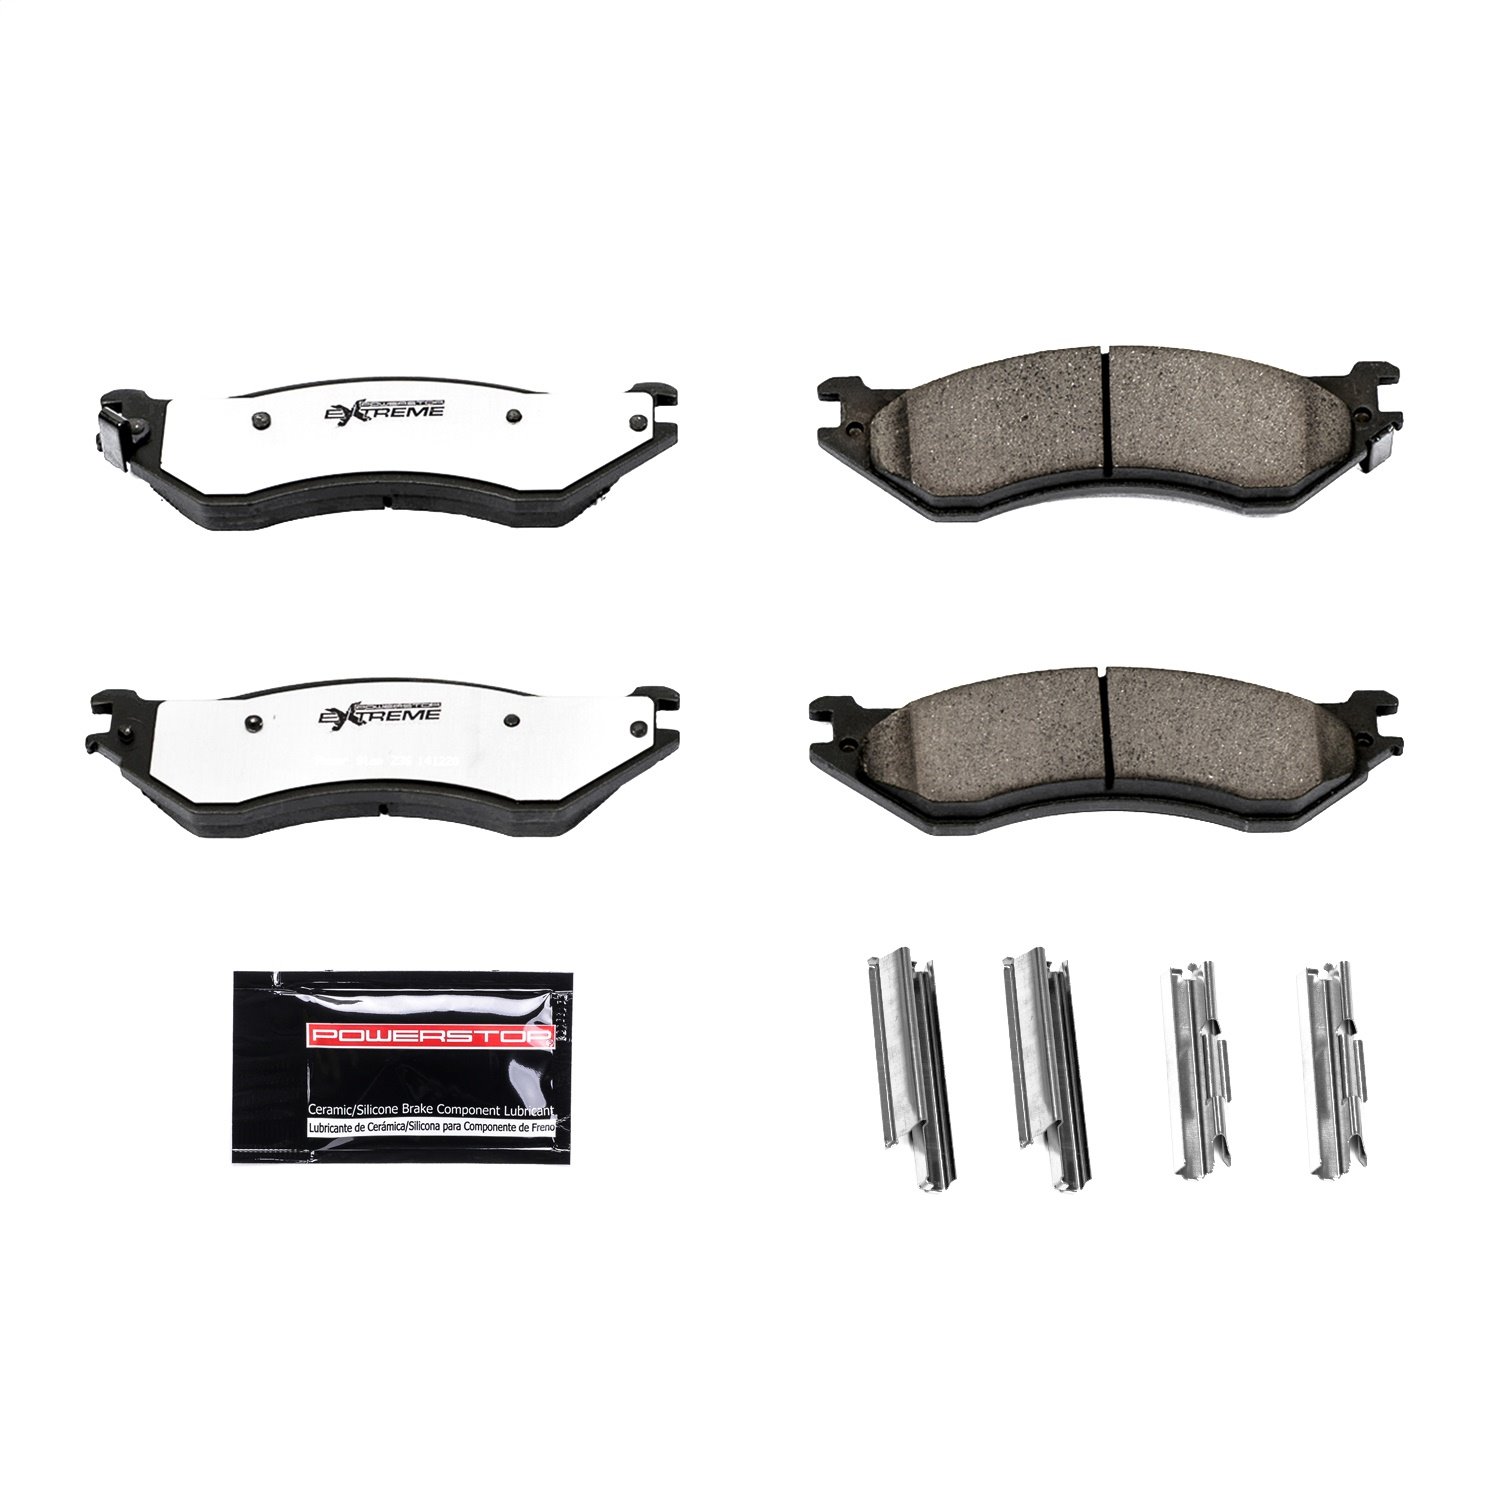 Z36 Truck And Tow Carbon Ceramic Brake Pads Specifically engineered for towing or hauling